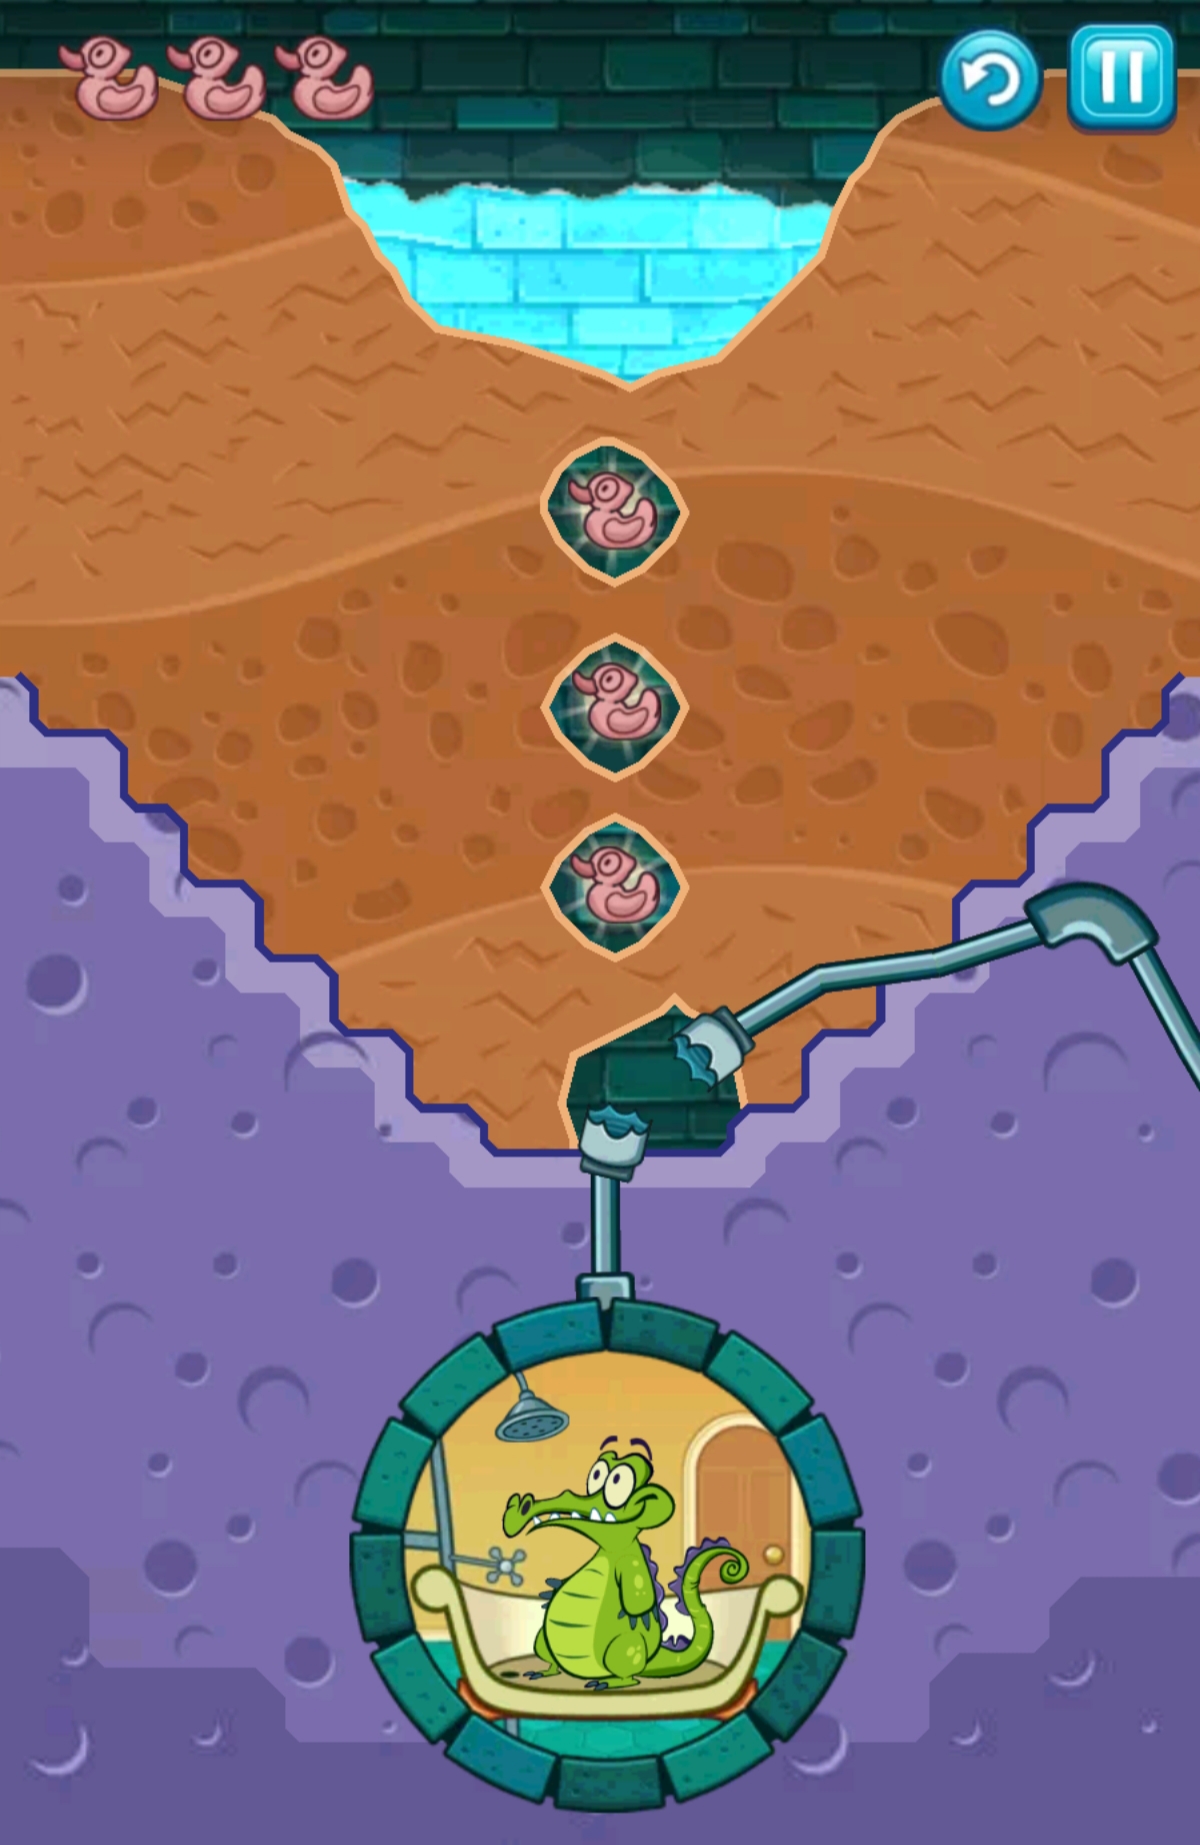 Dig This Water - Play Dig This Water on Kevin Games